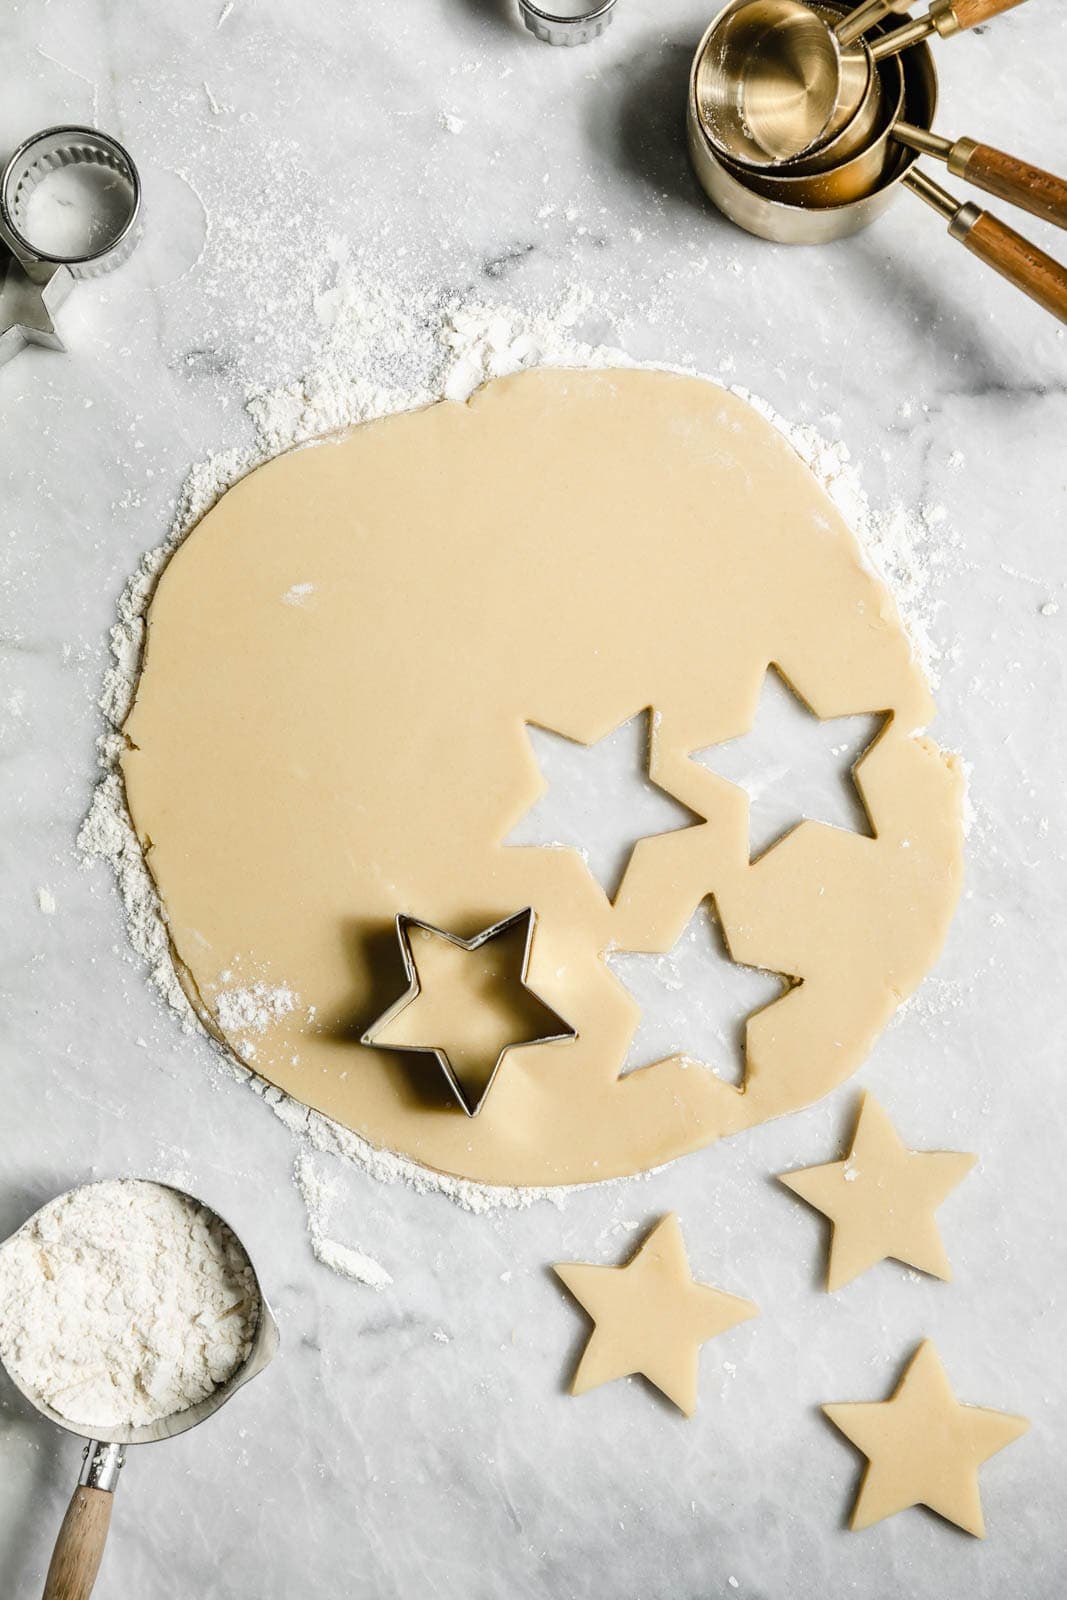 perfect cut out sugar cookies recipe rolled out on a floured surface